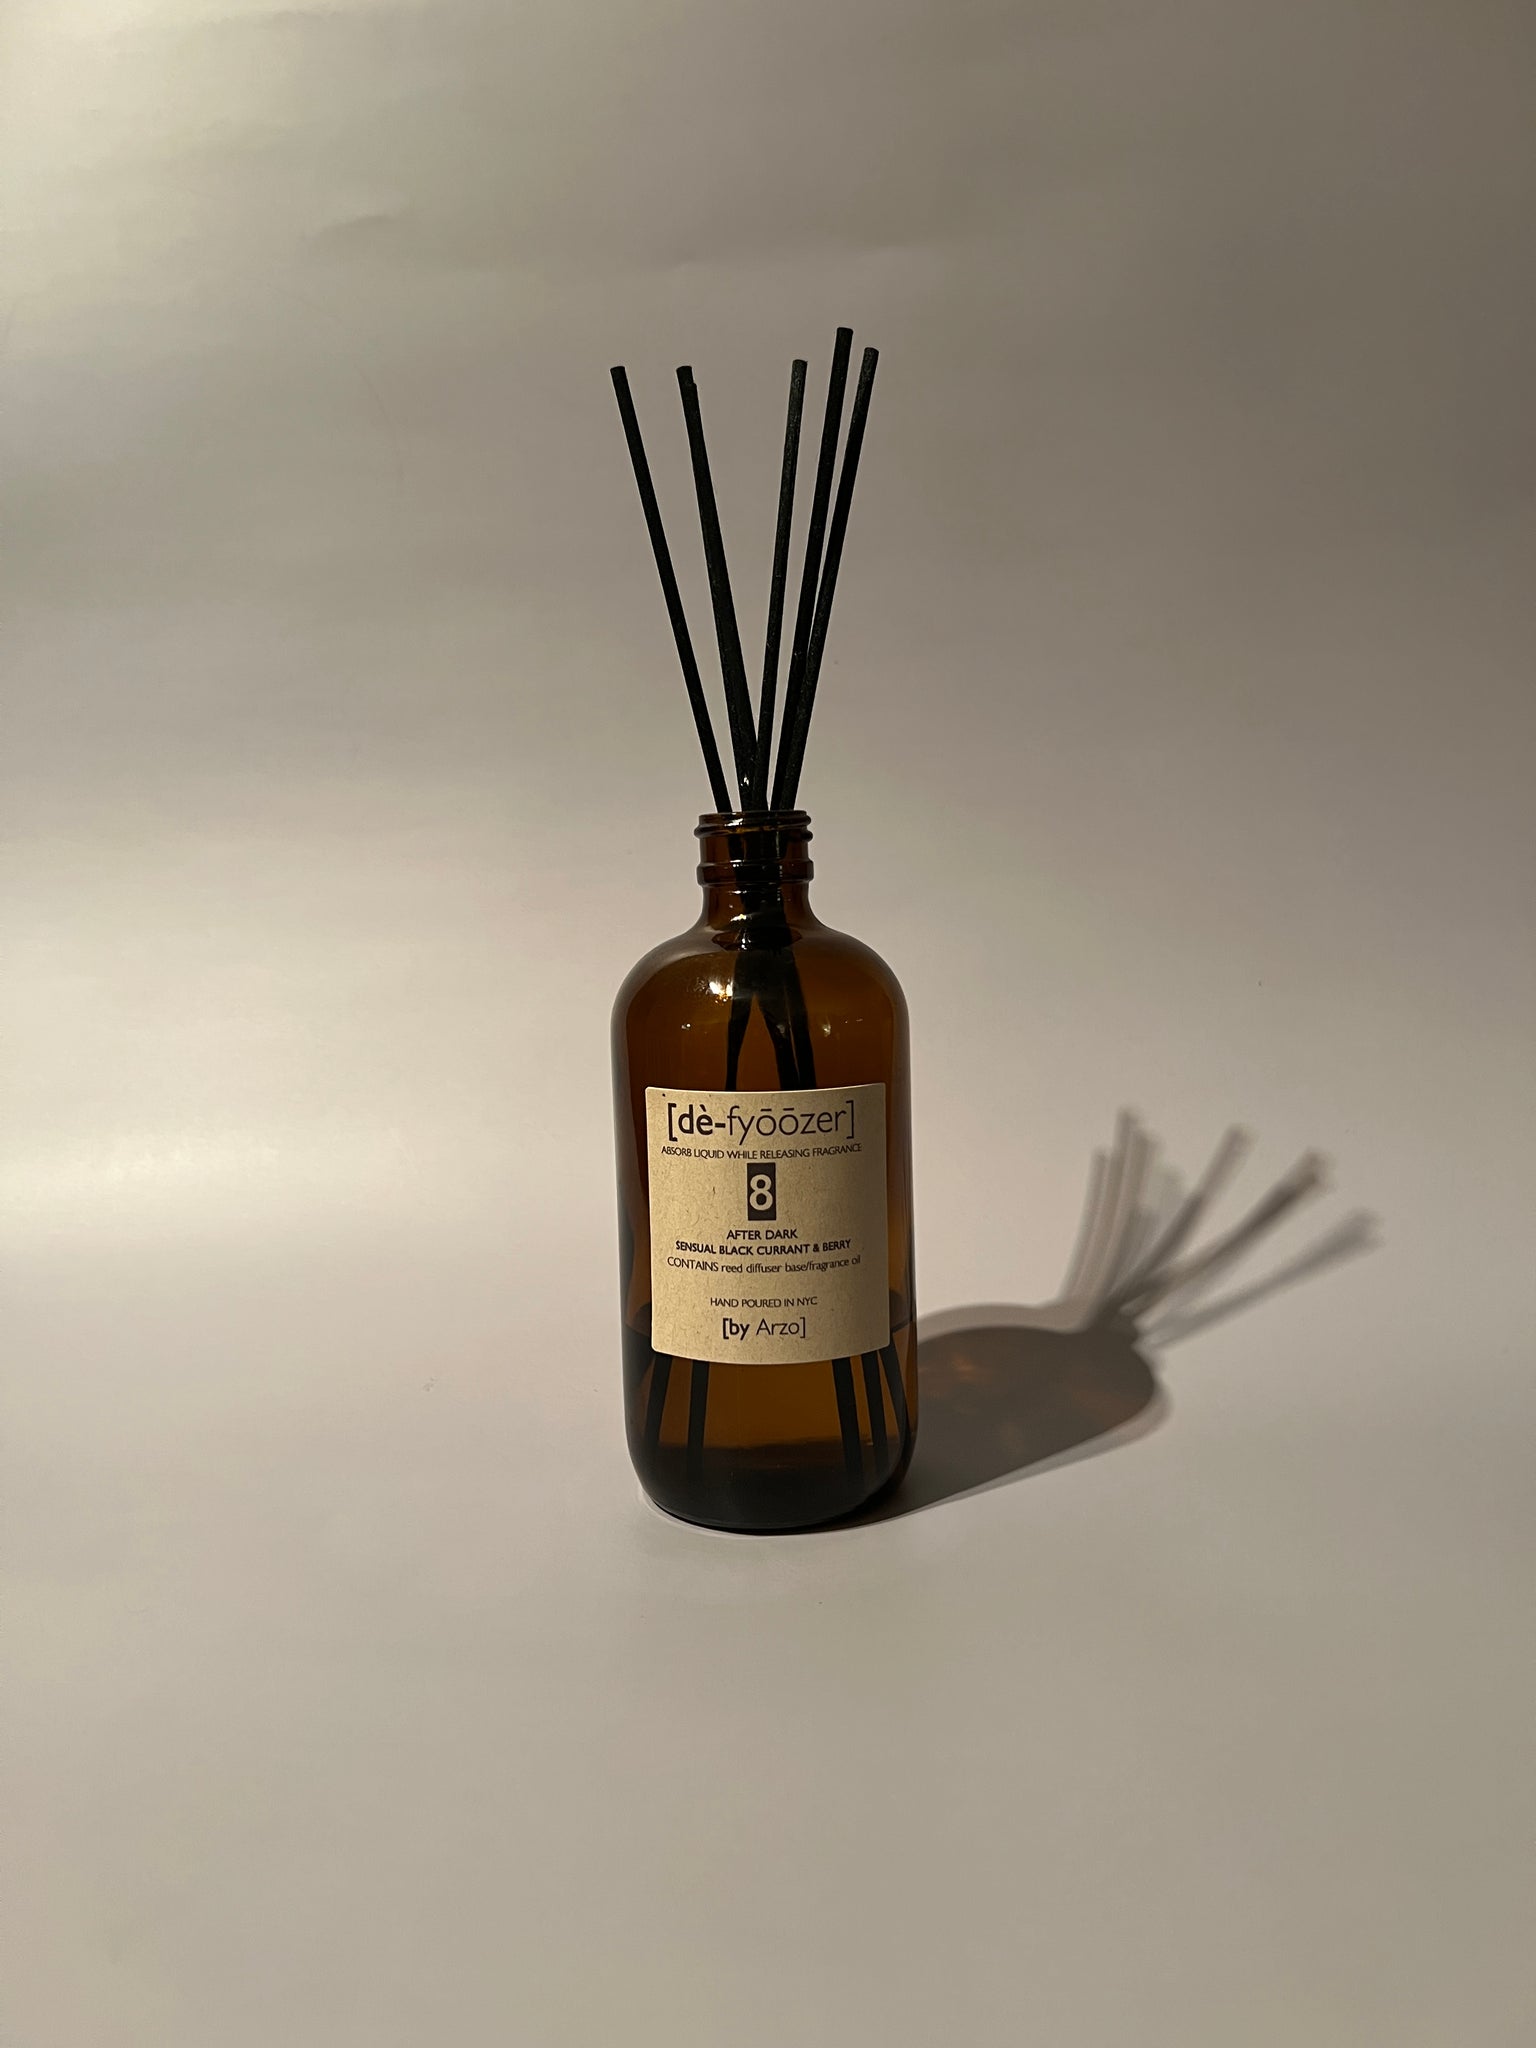 8 AFTER DARK REED DIFFUSER